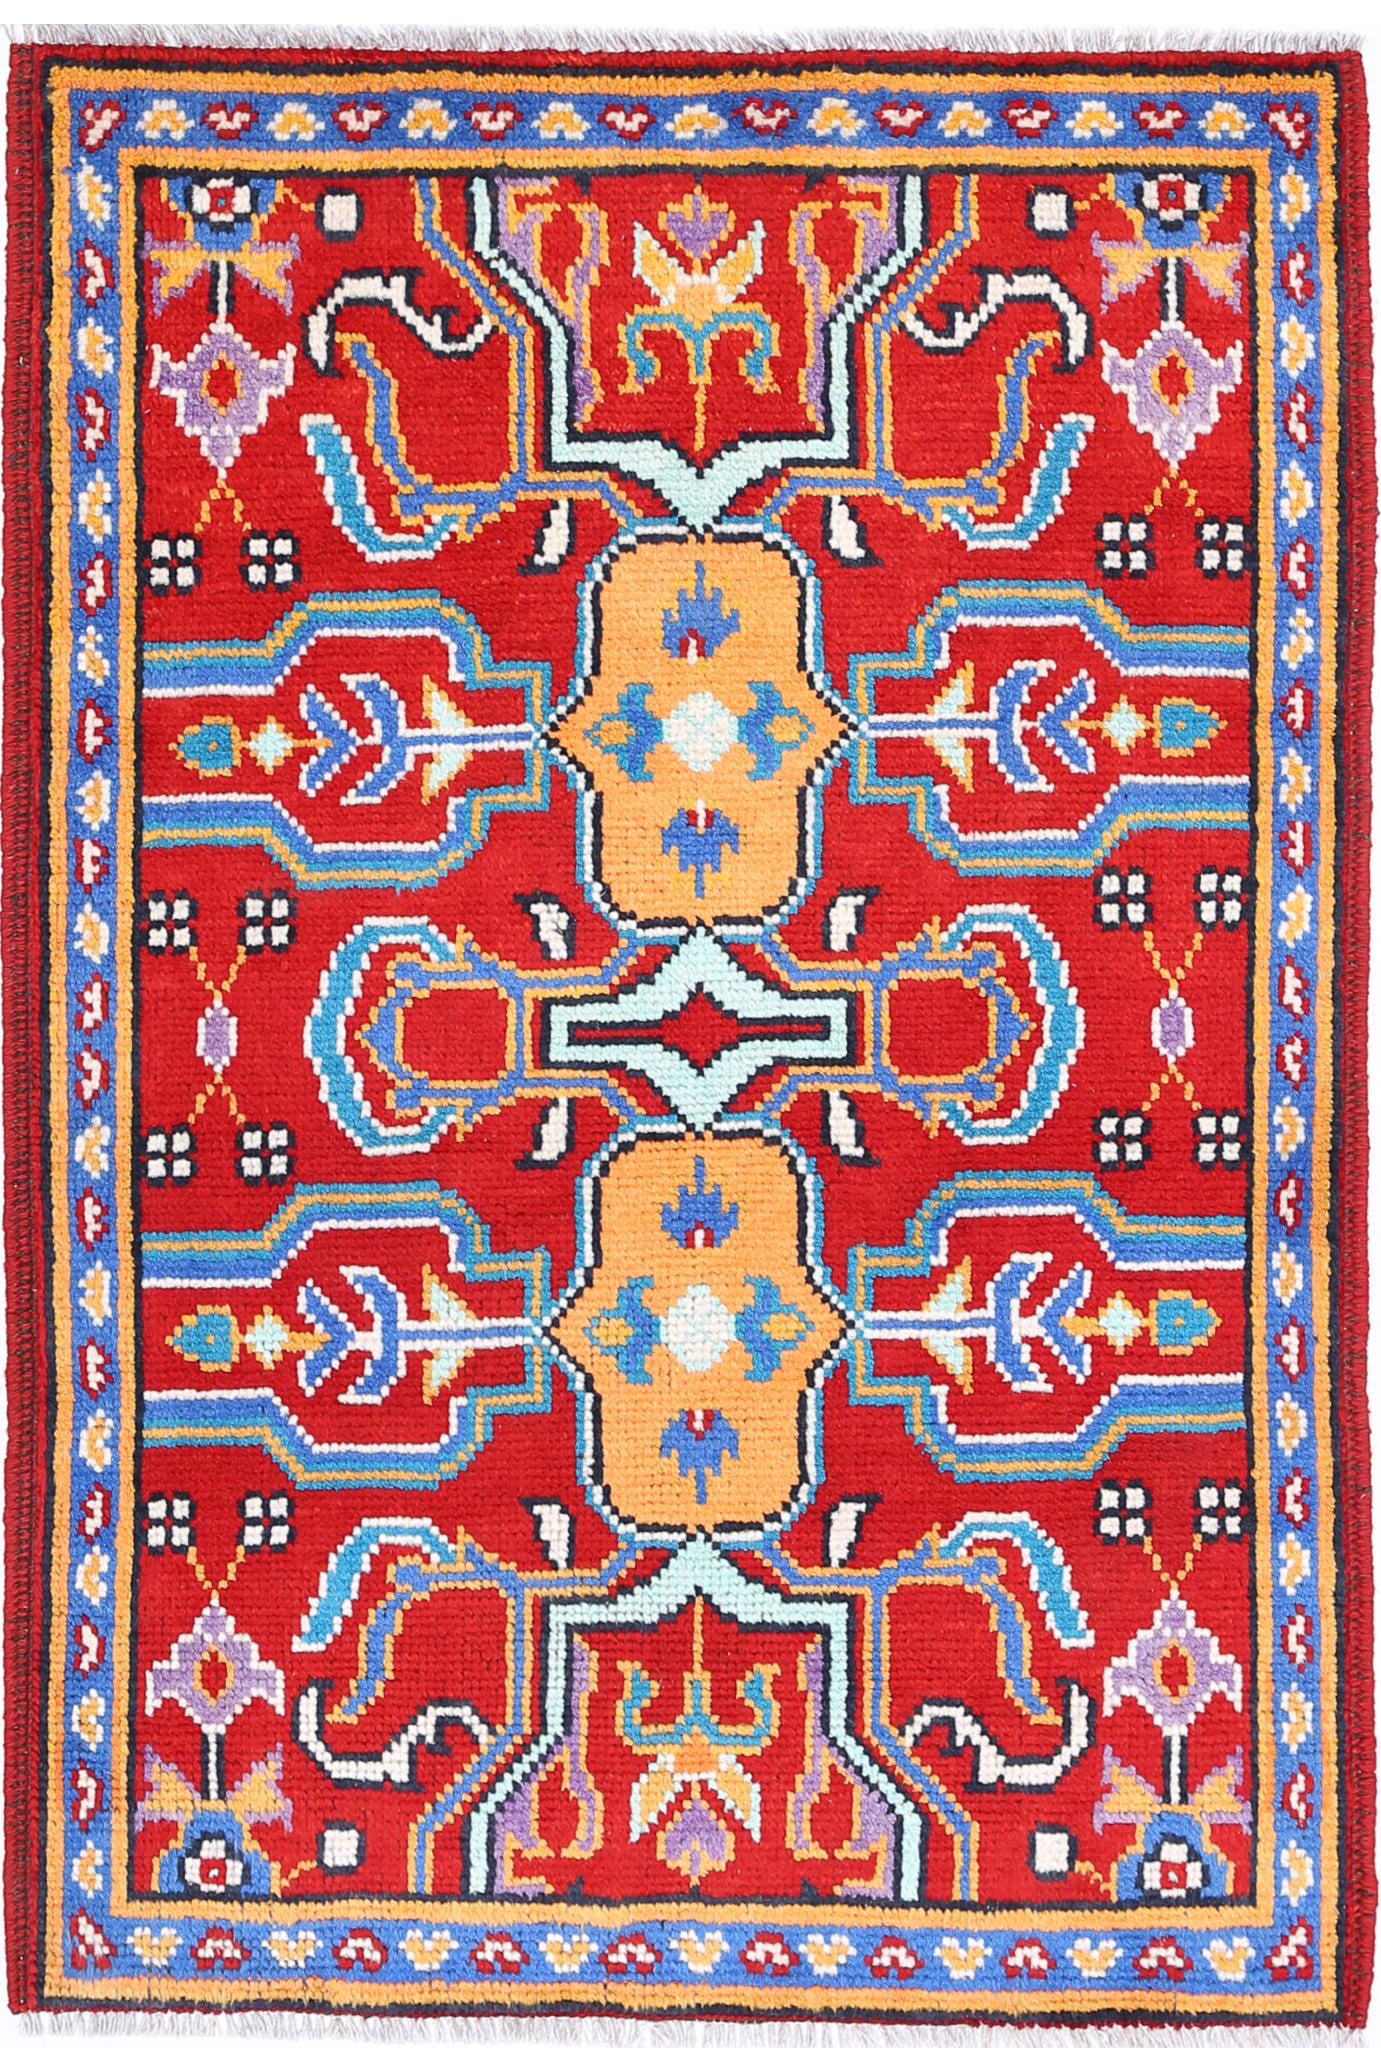 Revival-hand-knotted-qarghani-wool-rug-5014192.jpg